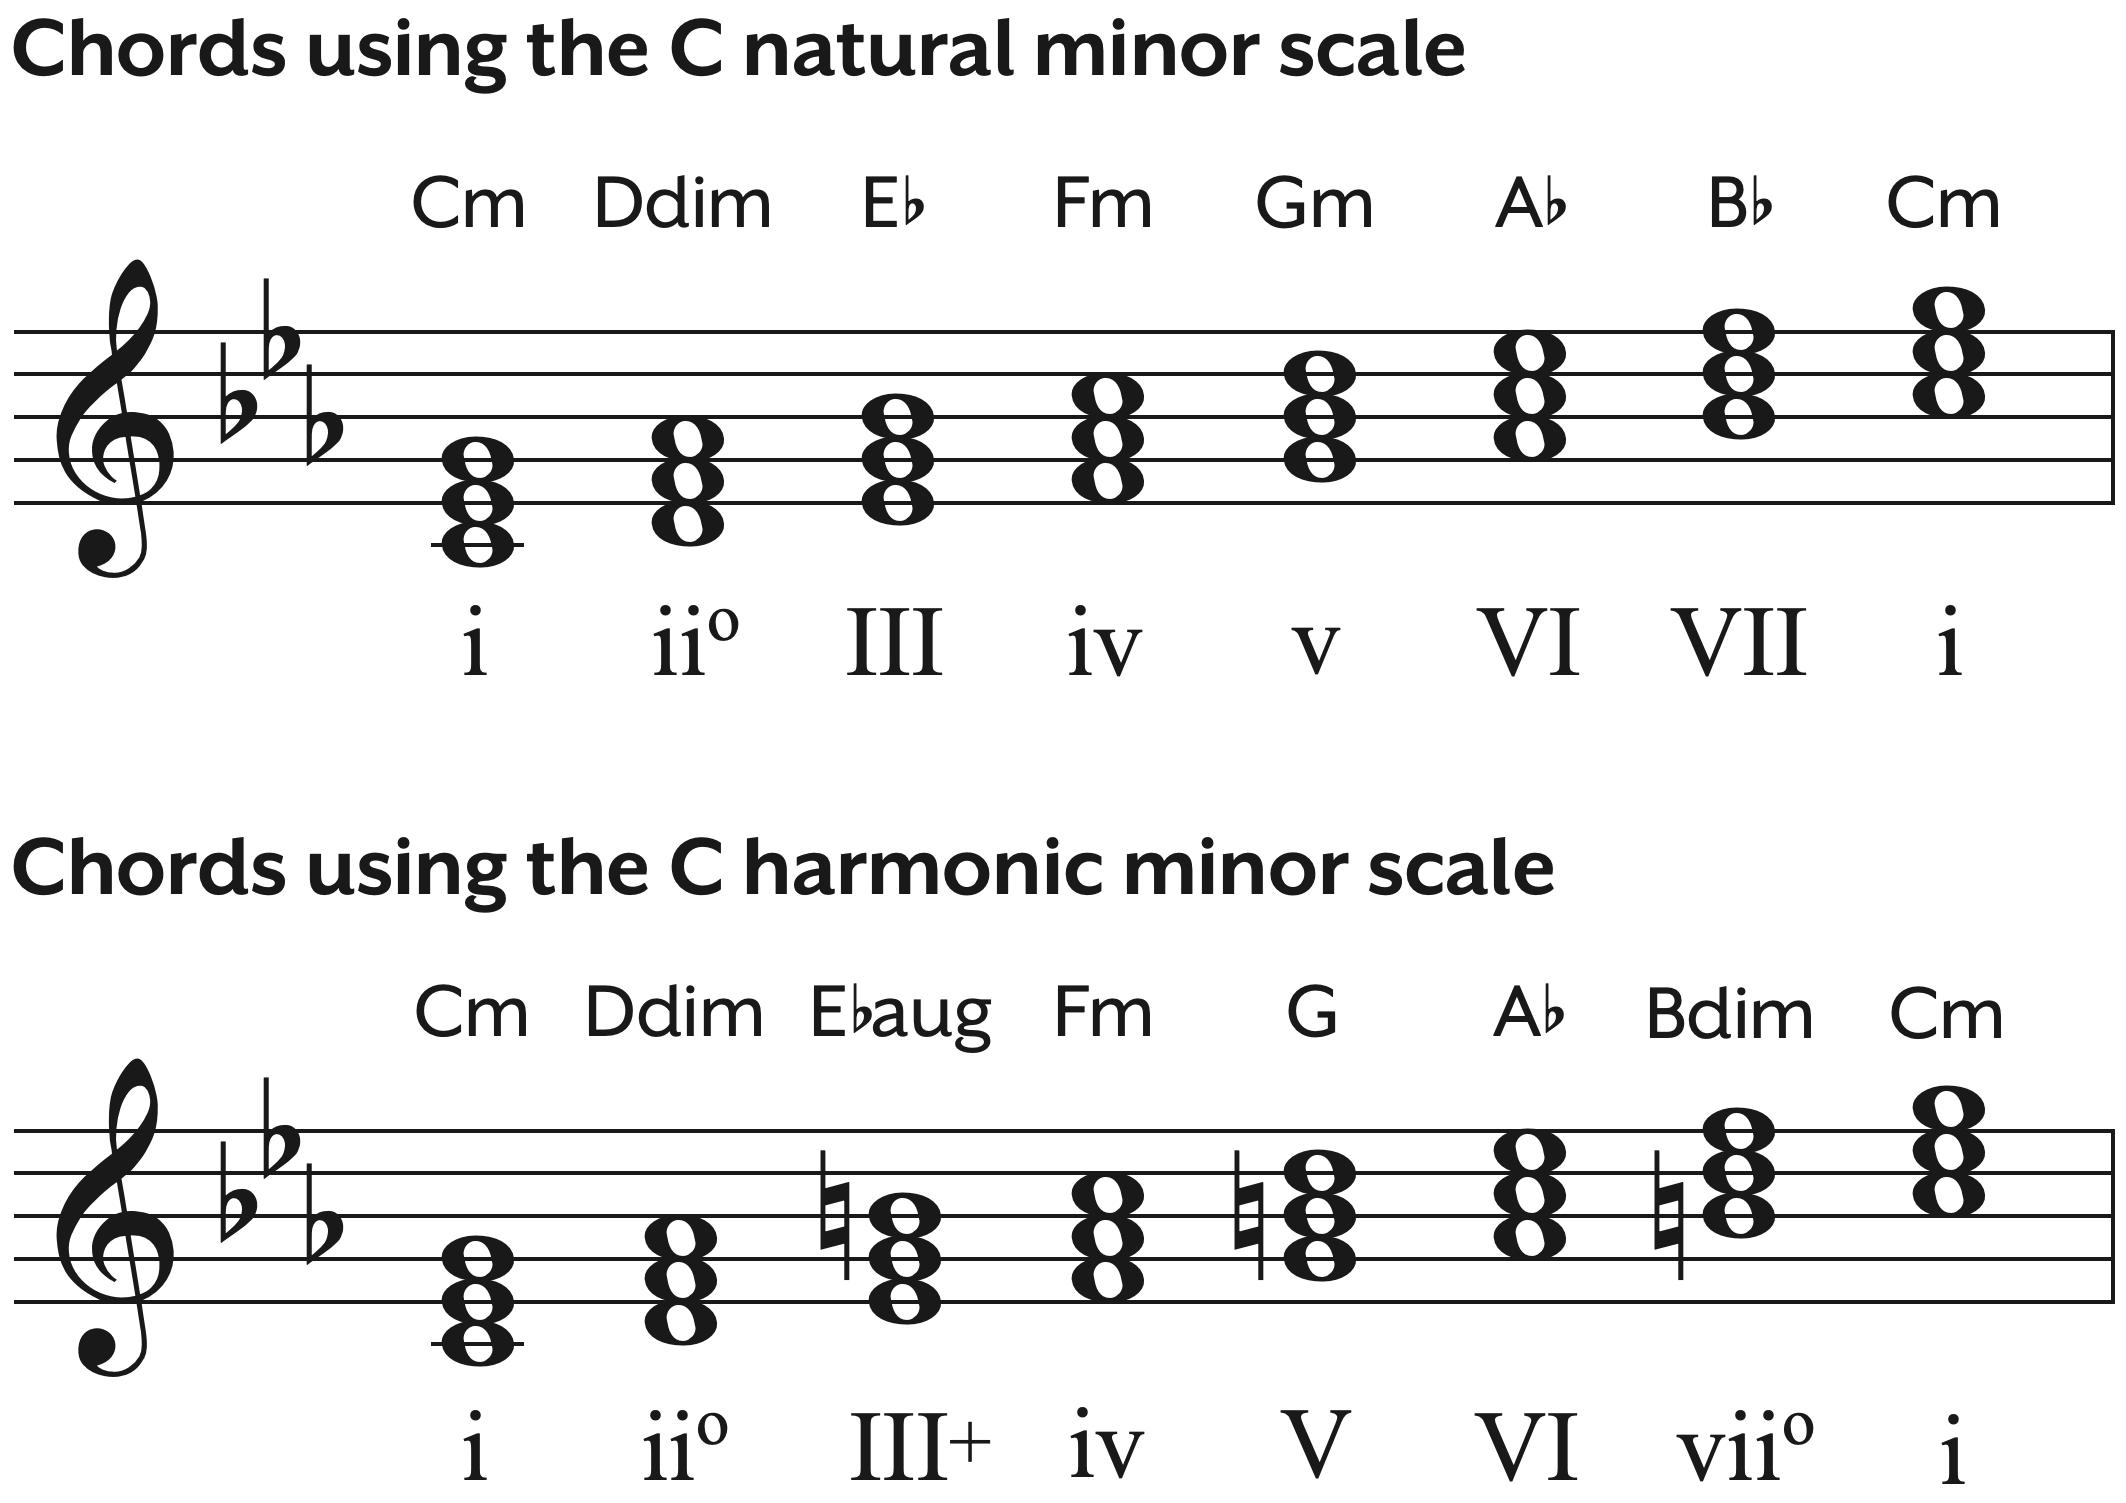 Chords using the C natural minor scale, the C harmonic minor scale, and the C melodic minor scale